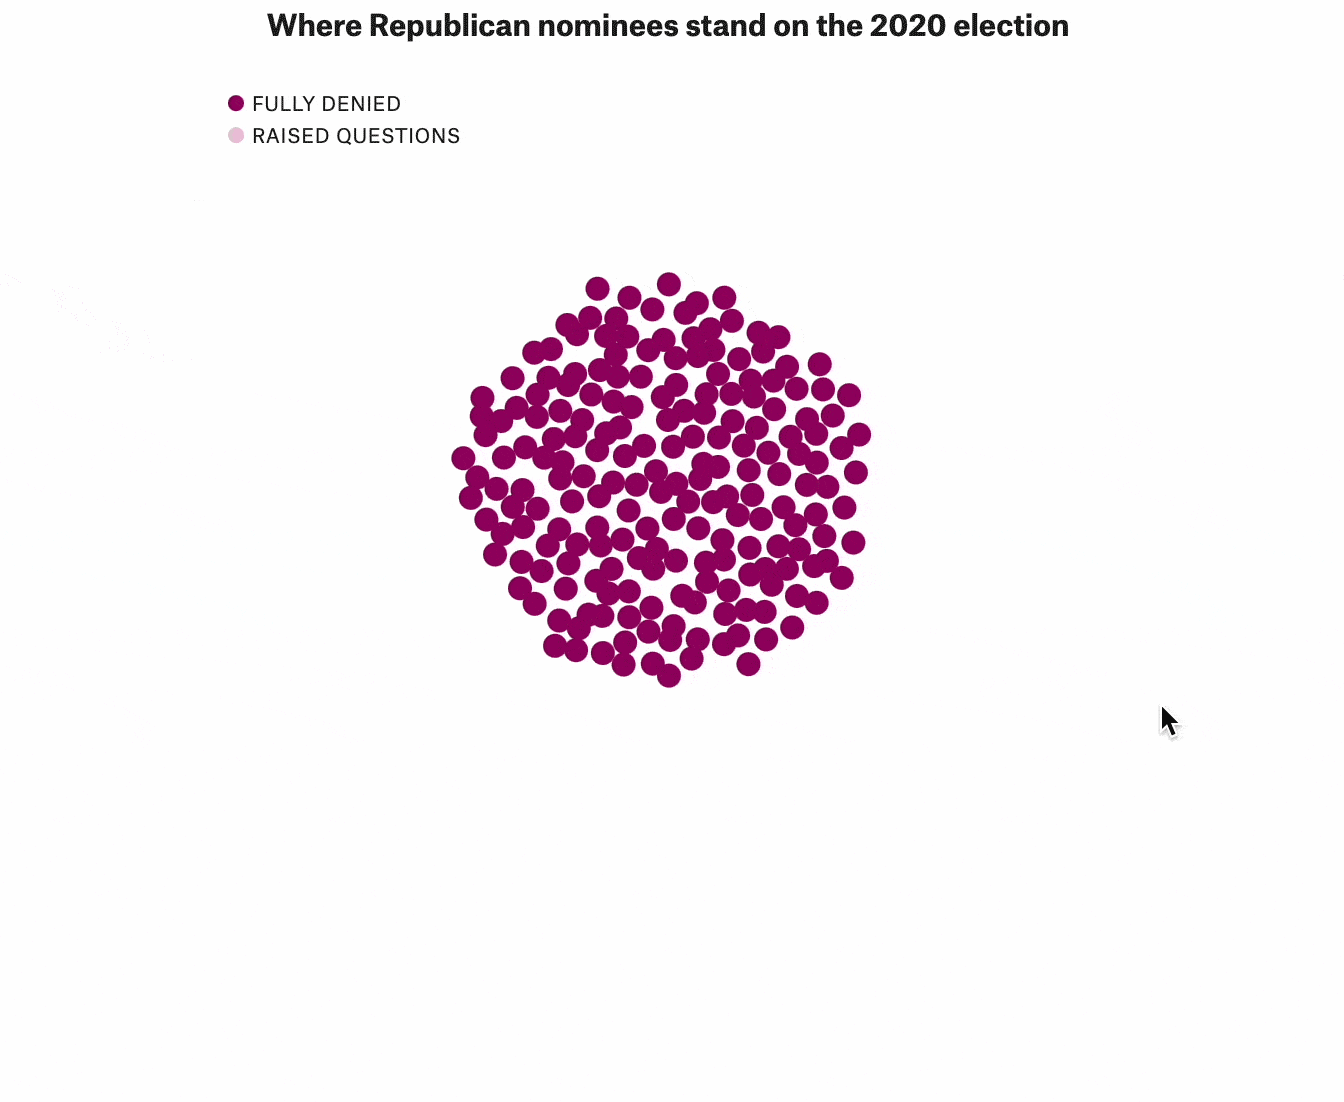 An animated GIF shows a ball of smaller dots growing larger, showing the election denial status of Republicans candidates in 2022 midterms. 